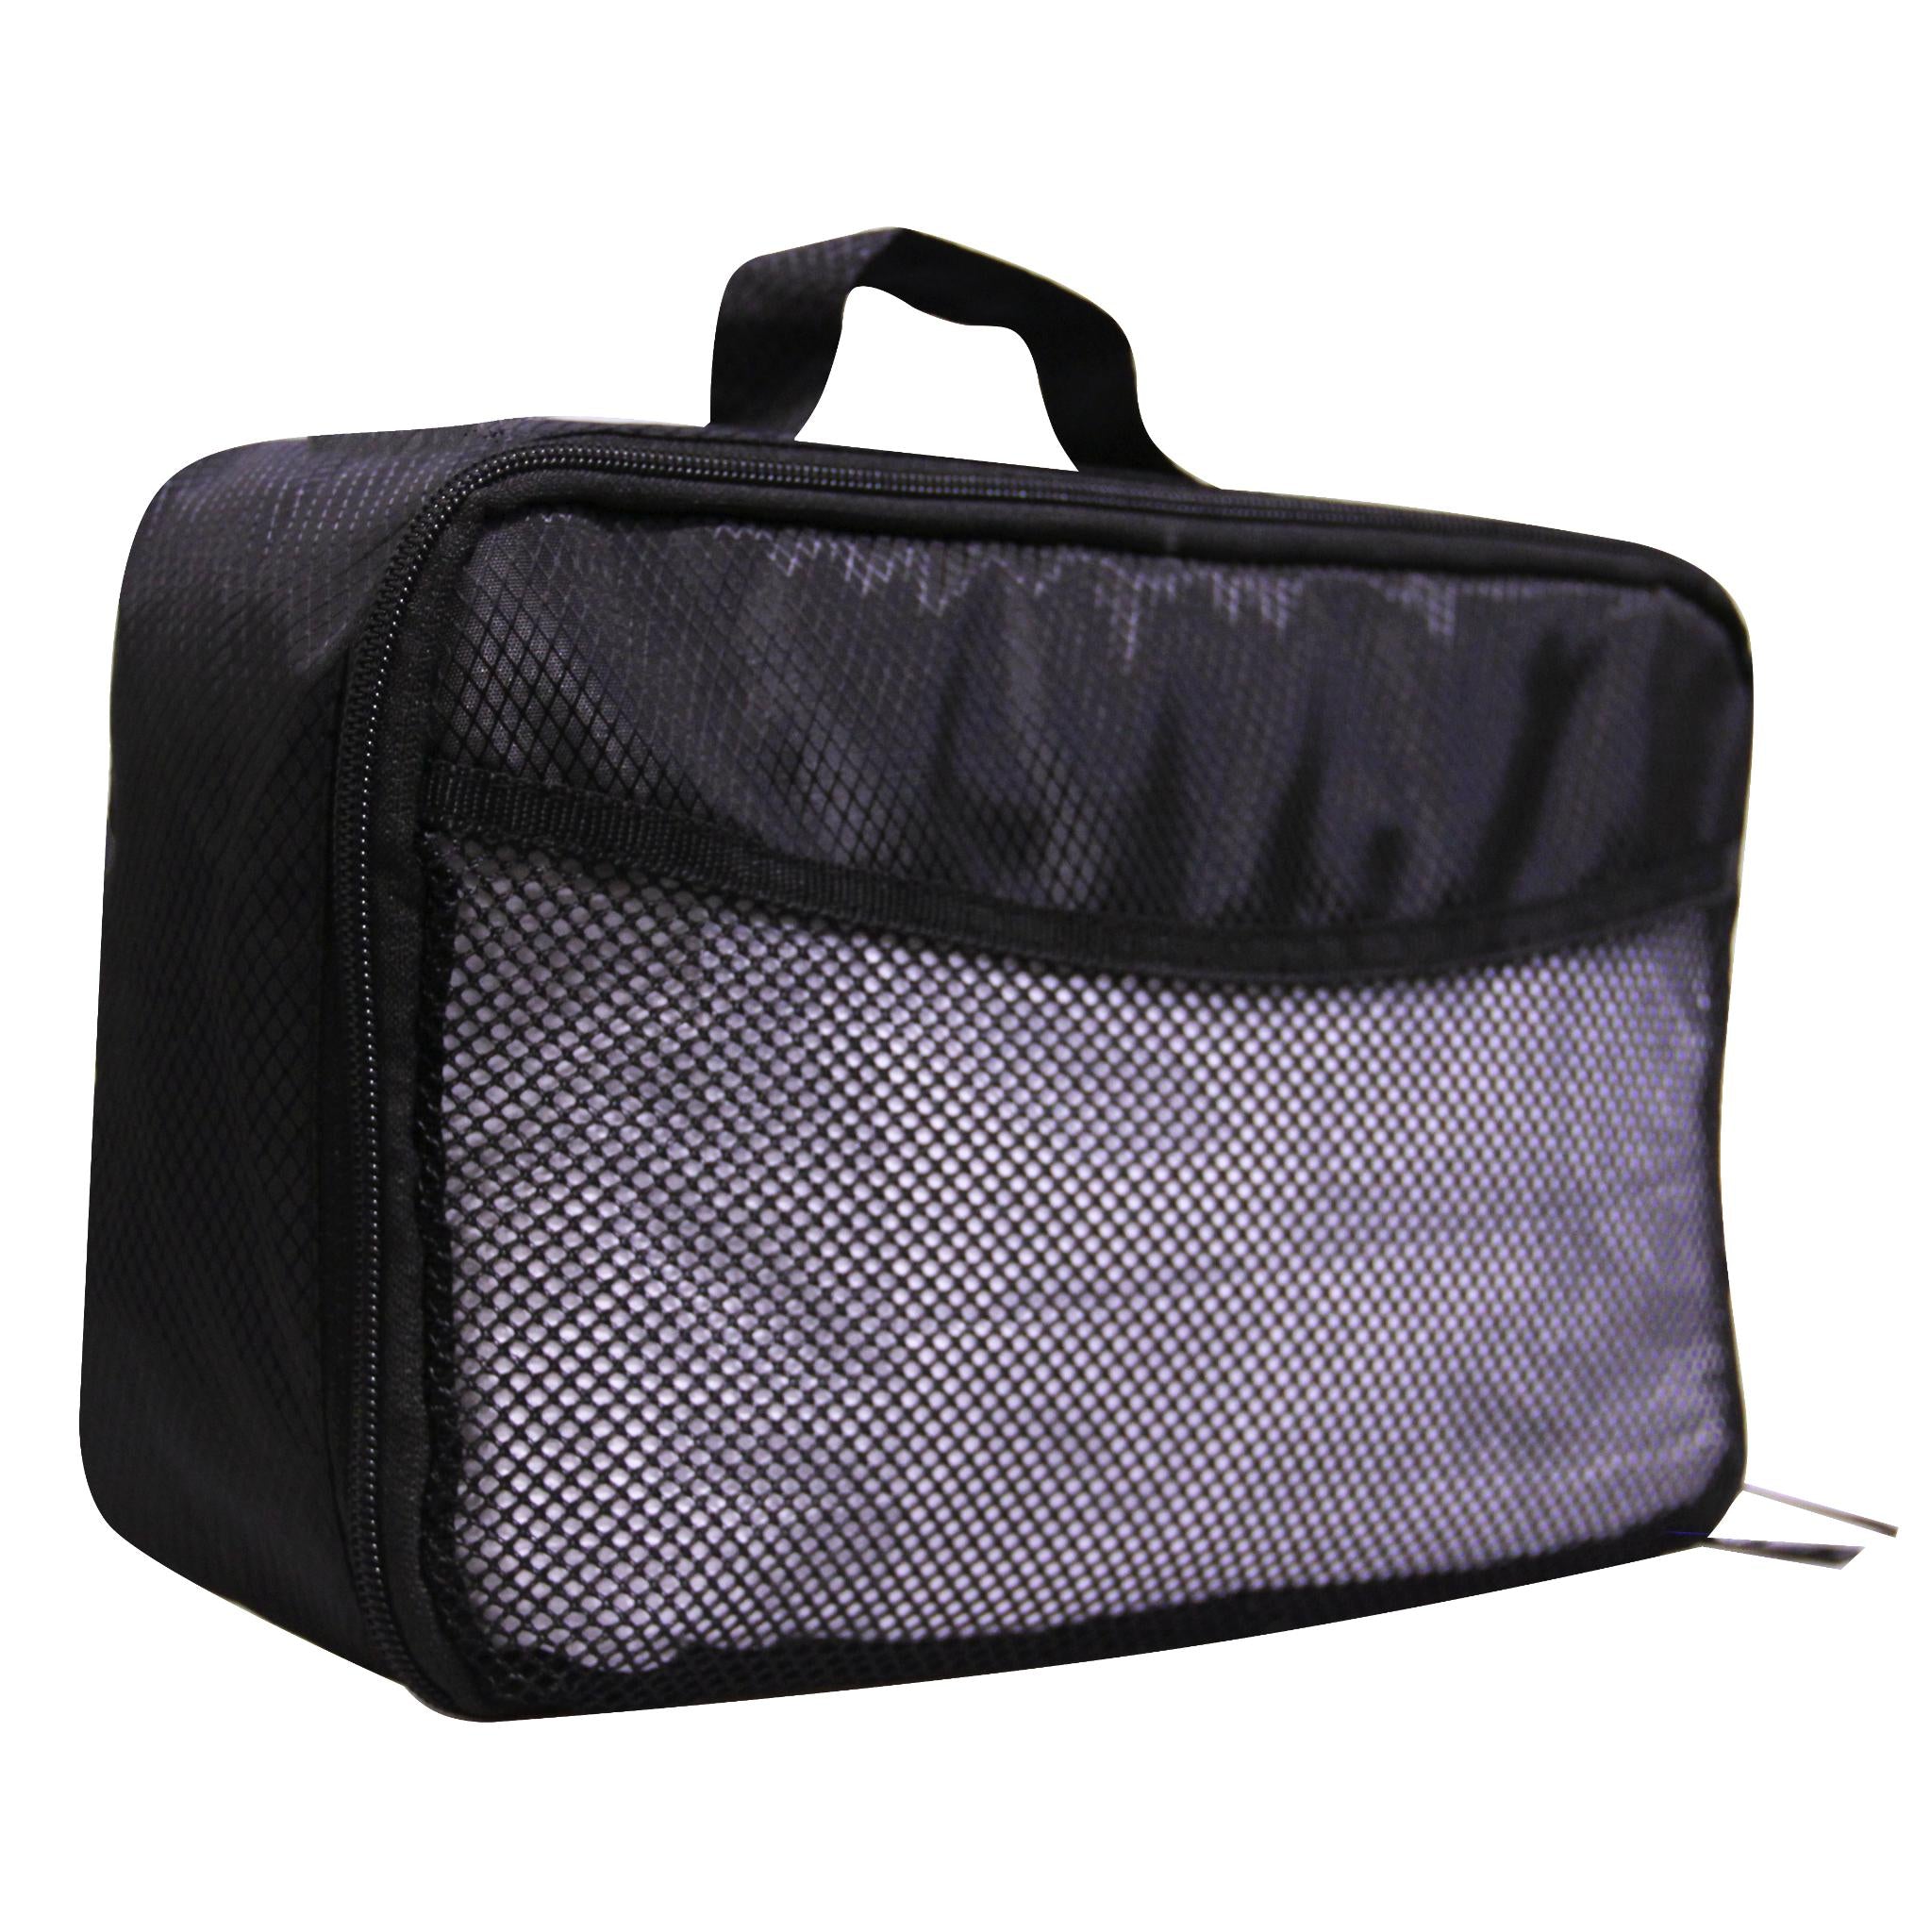 Mesh Packing Cube with Zippered Compression- Size Medium – Lieber's Luggage